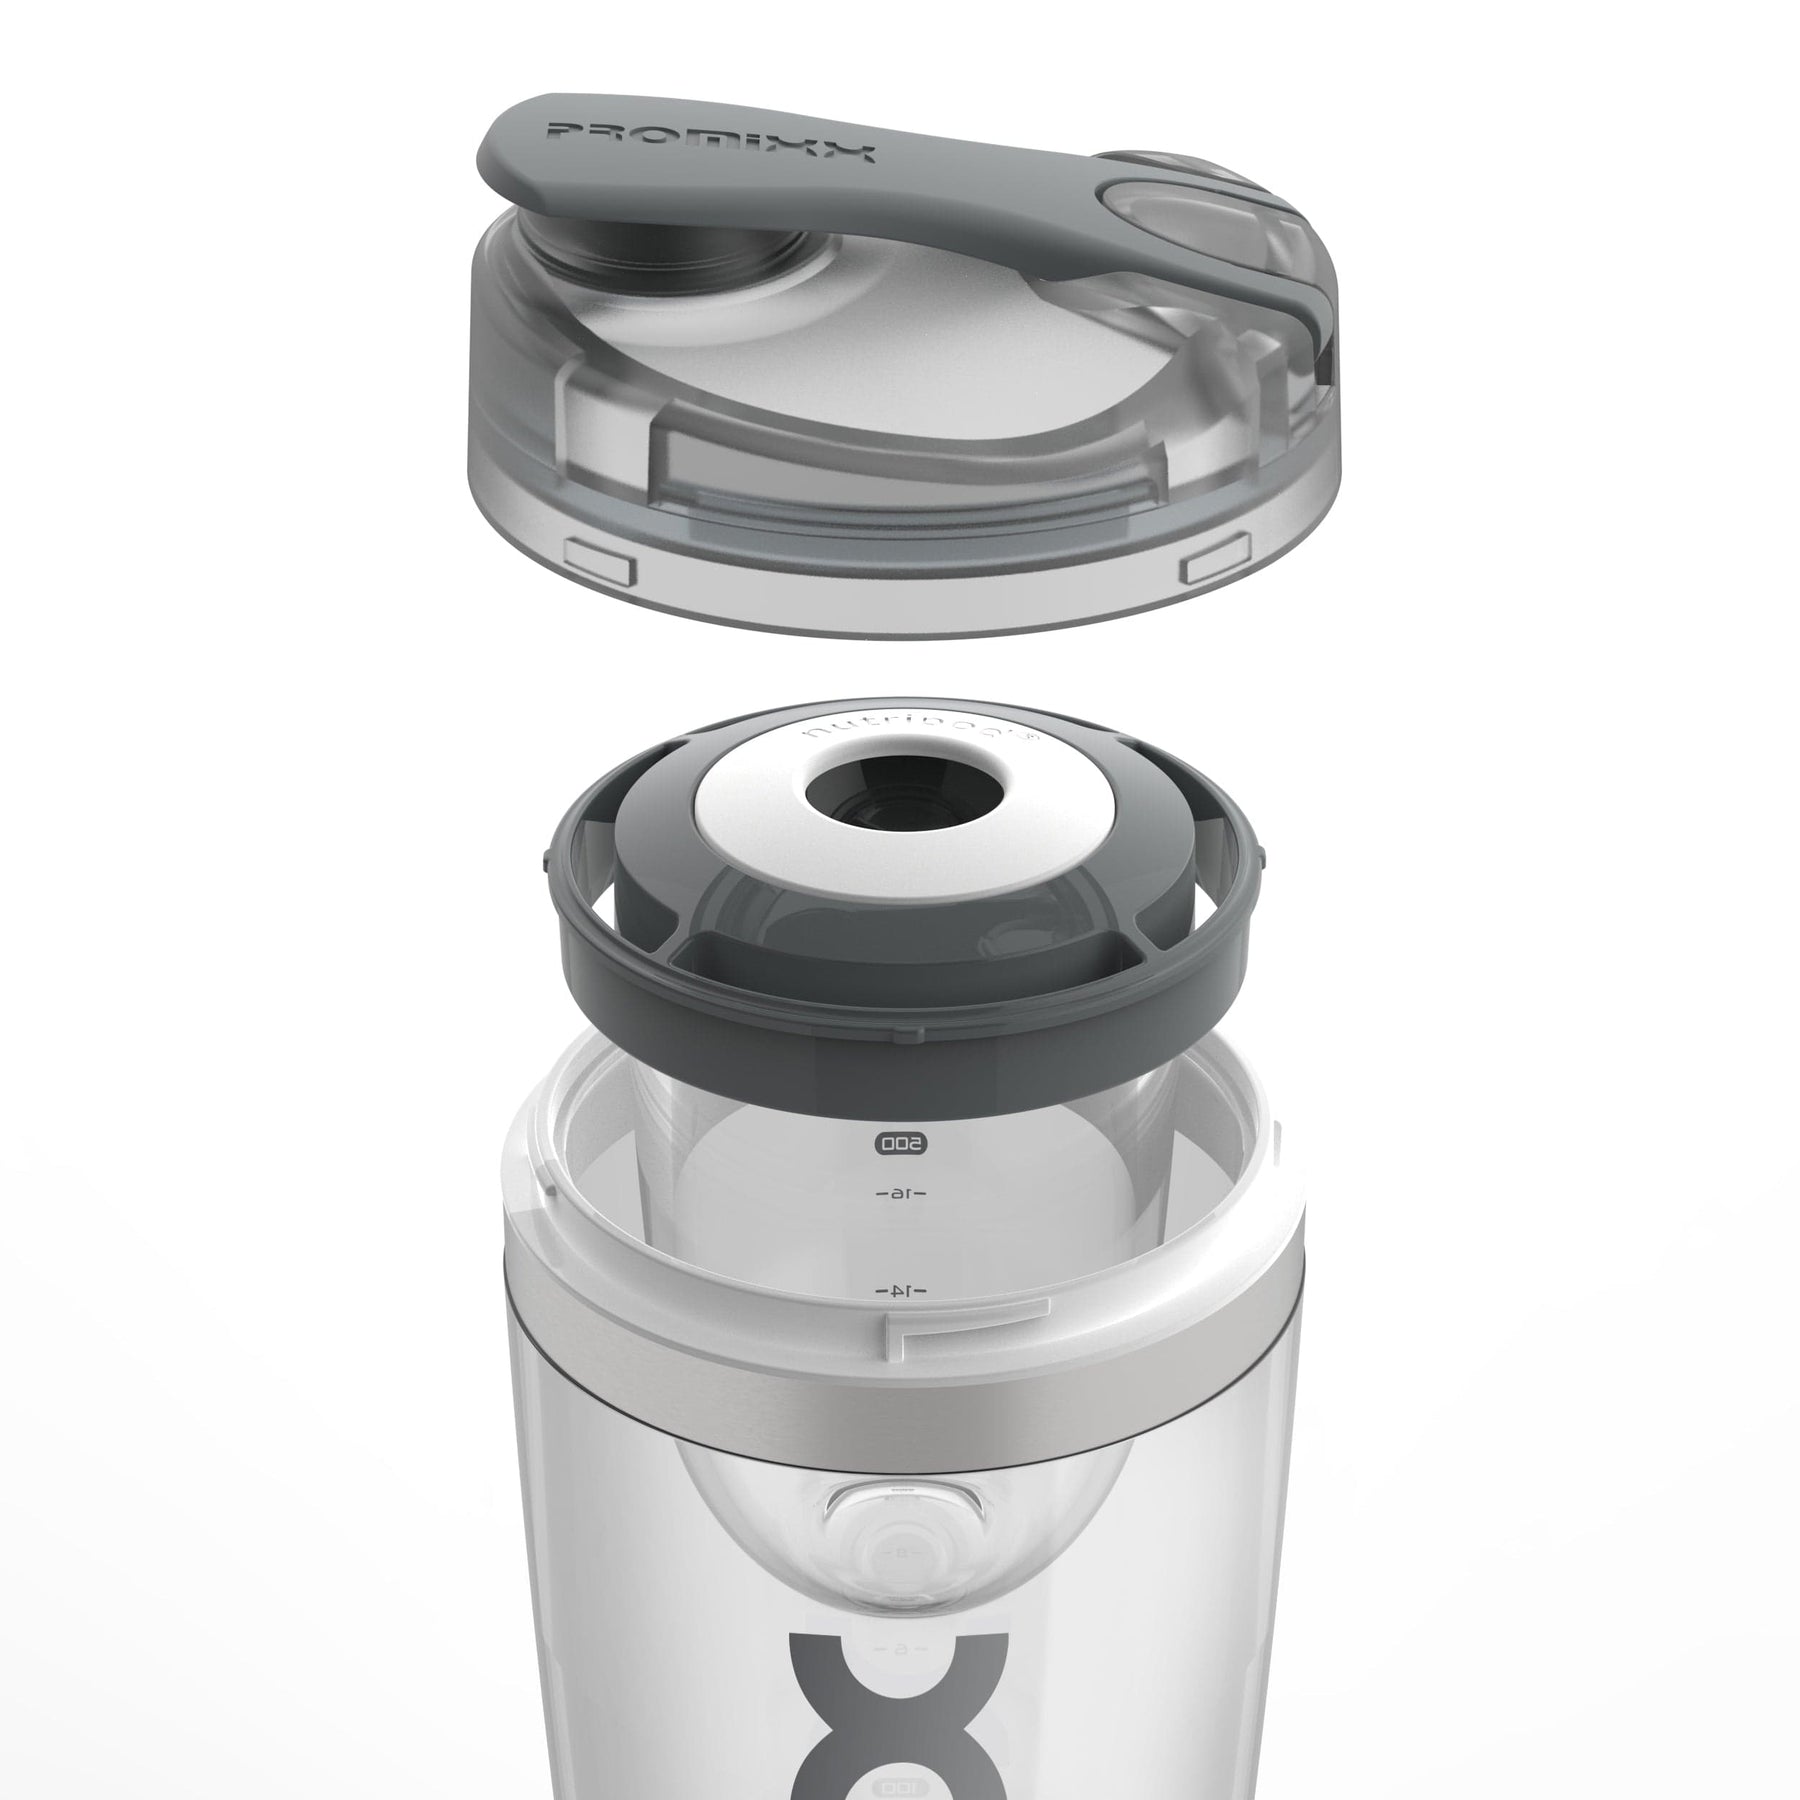 Promixx Charge Rechargeable Usb-c Electric Shaker Bottle With